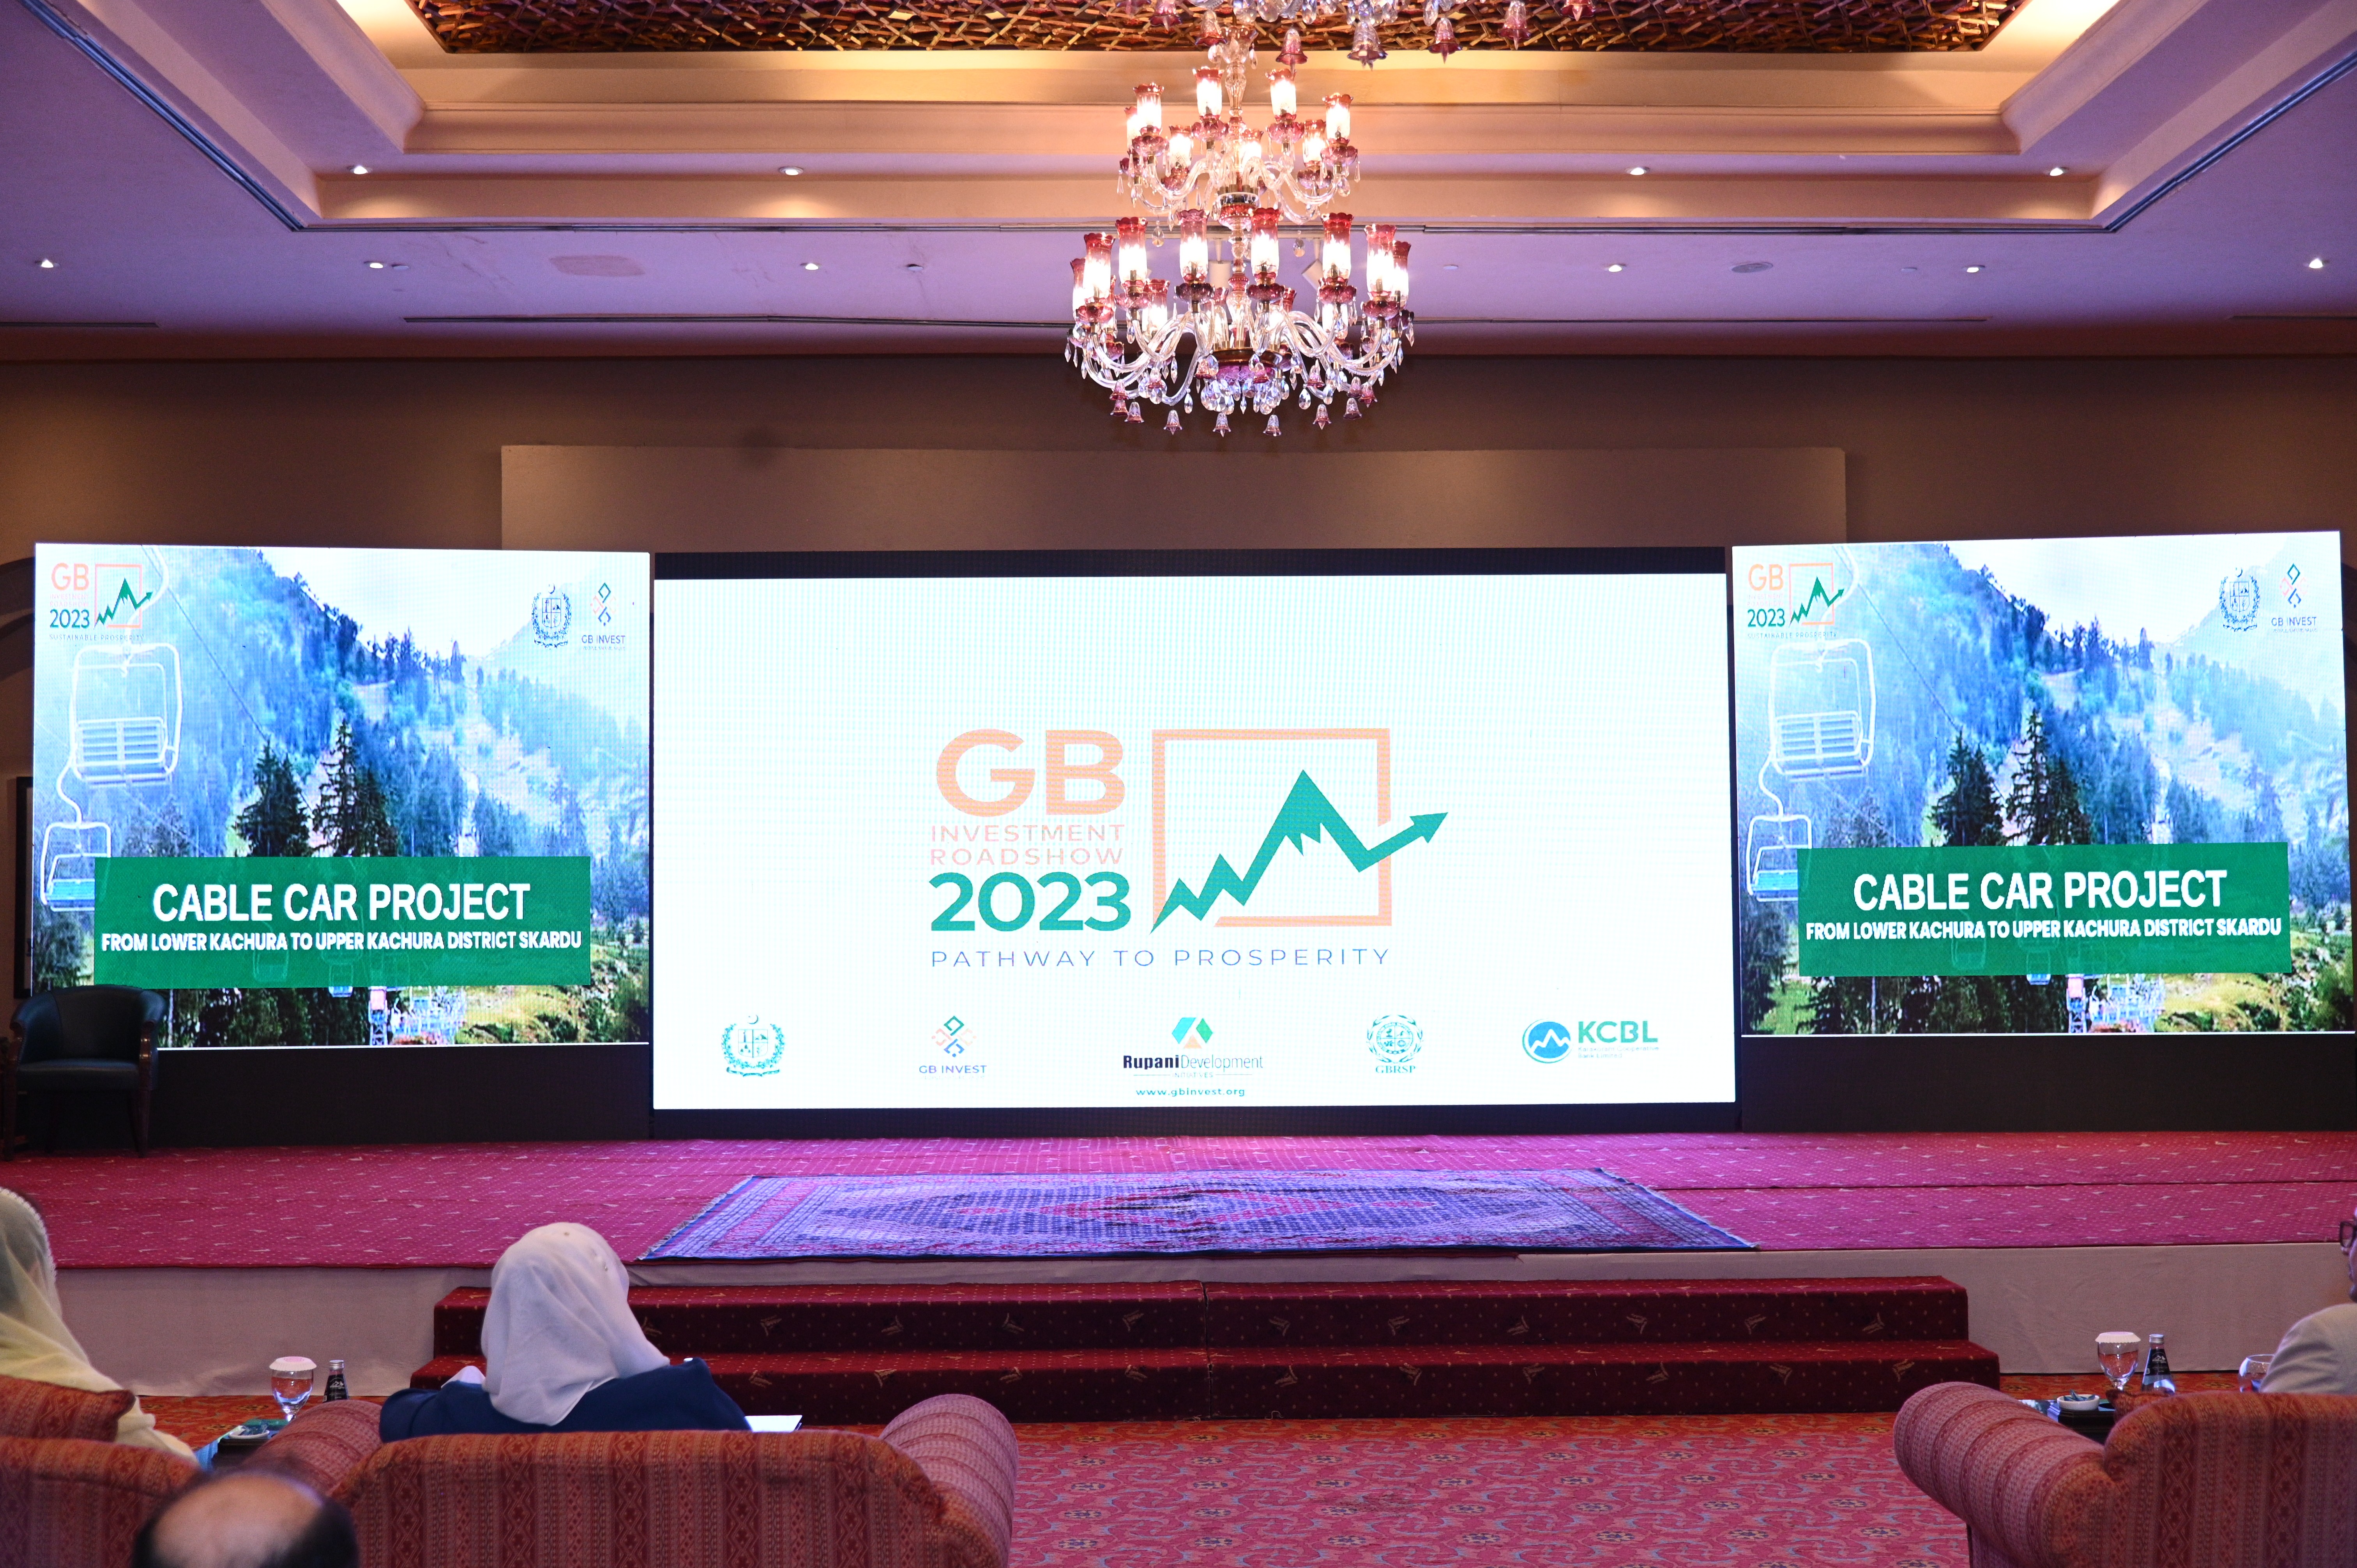 a Glimpse of a conference on GB investment roadshow 2023 with a theme of Pathway to Prosperity